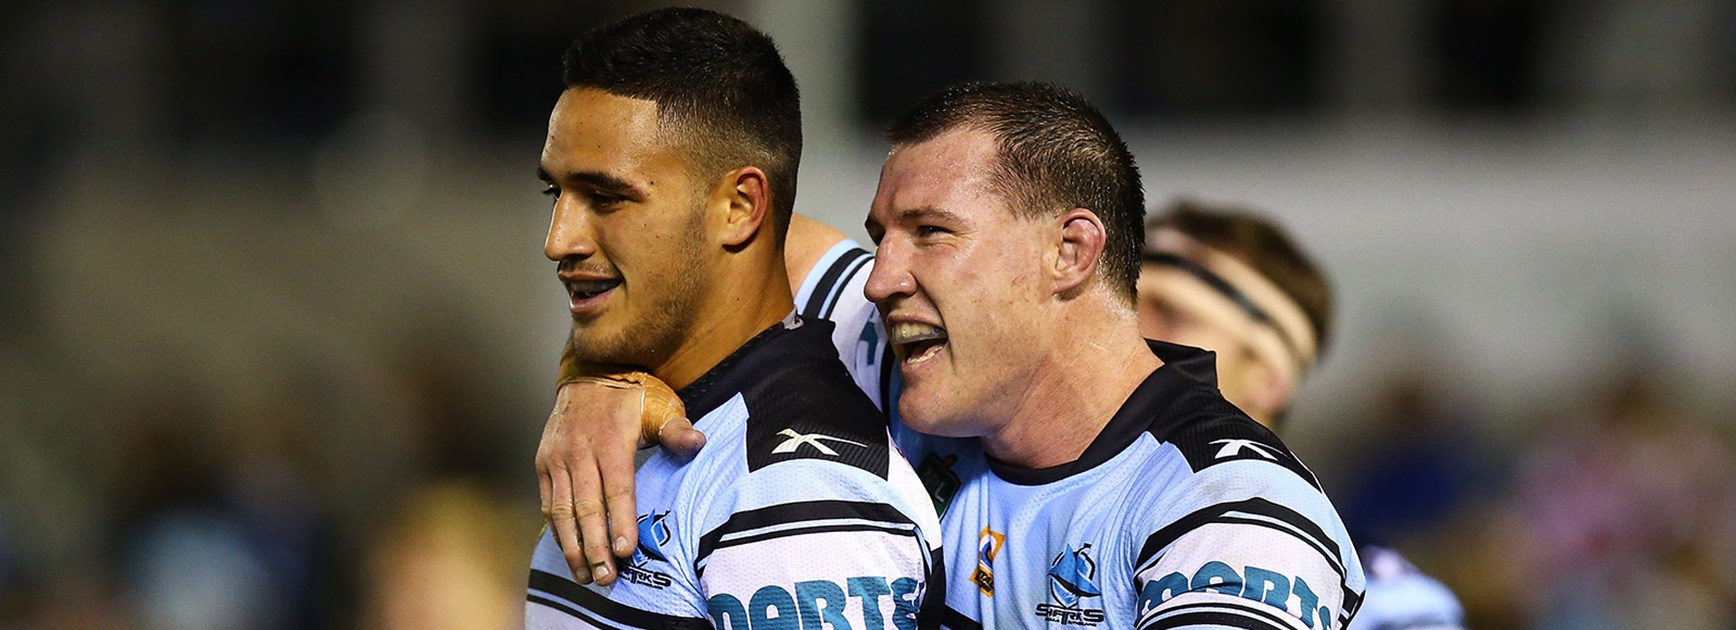 The Sharks celebrate a spectacular length of the field try to Valentine Holmes.